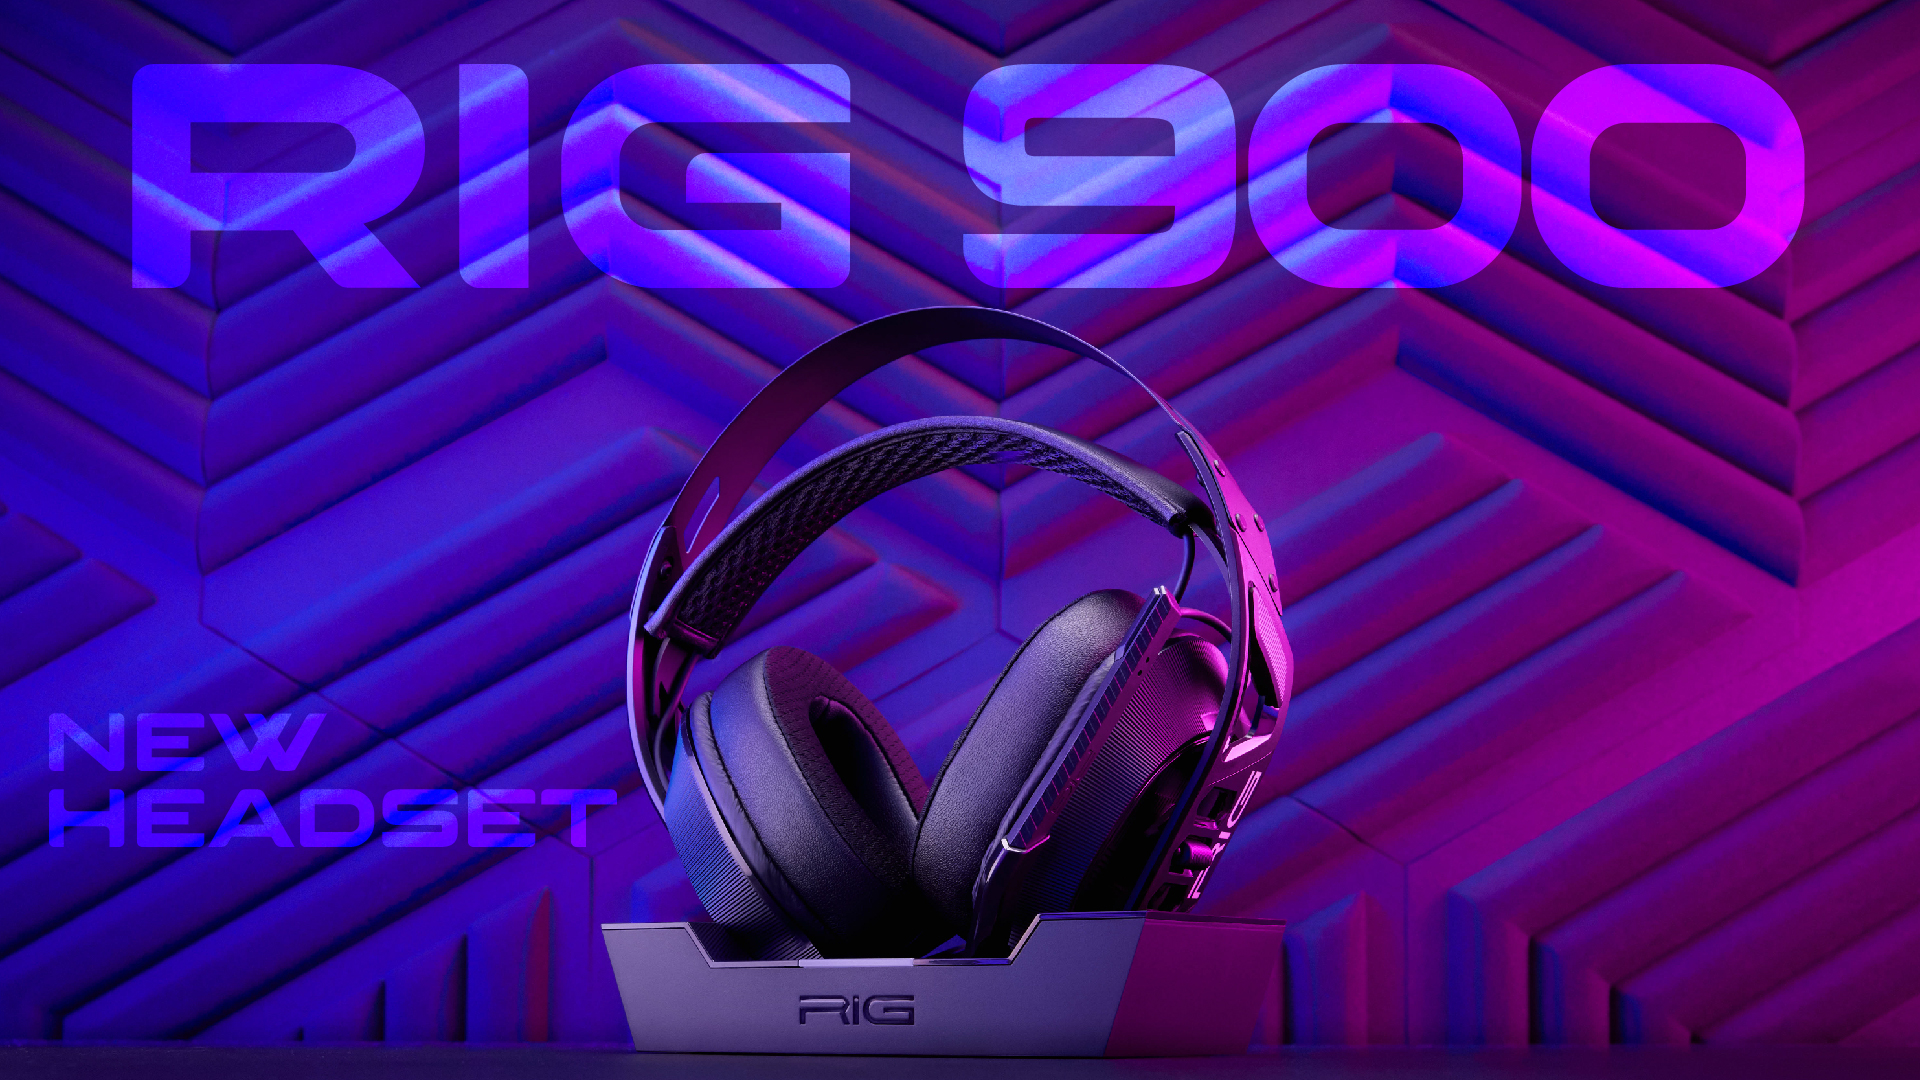 RIG Keeps The Headsets Fresh With Their New 900 Series Release